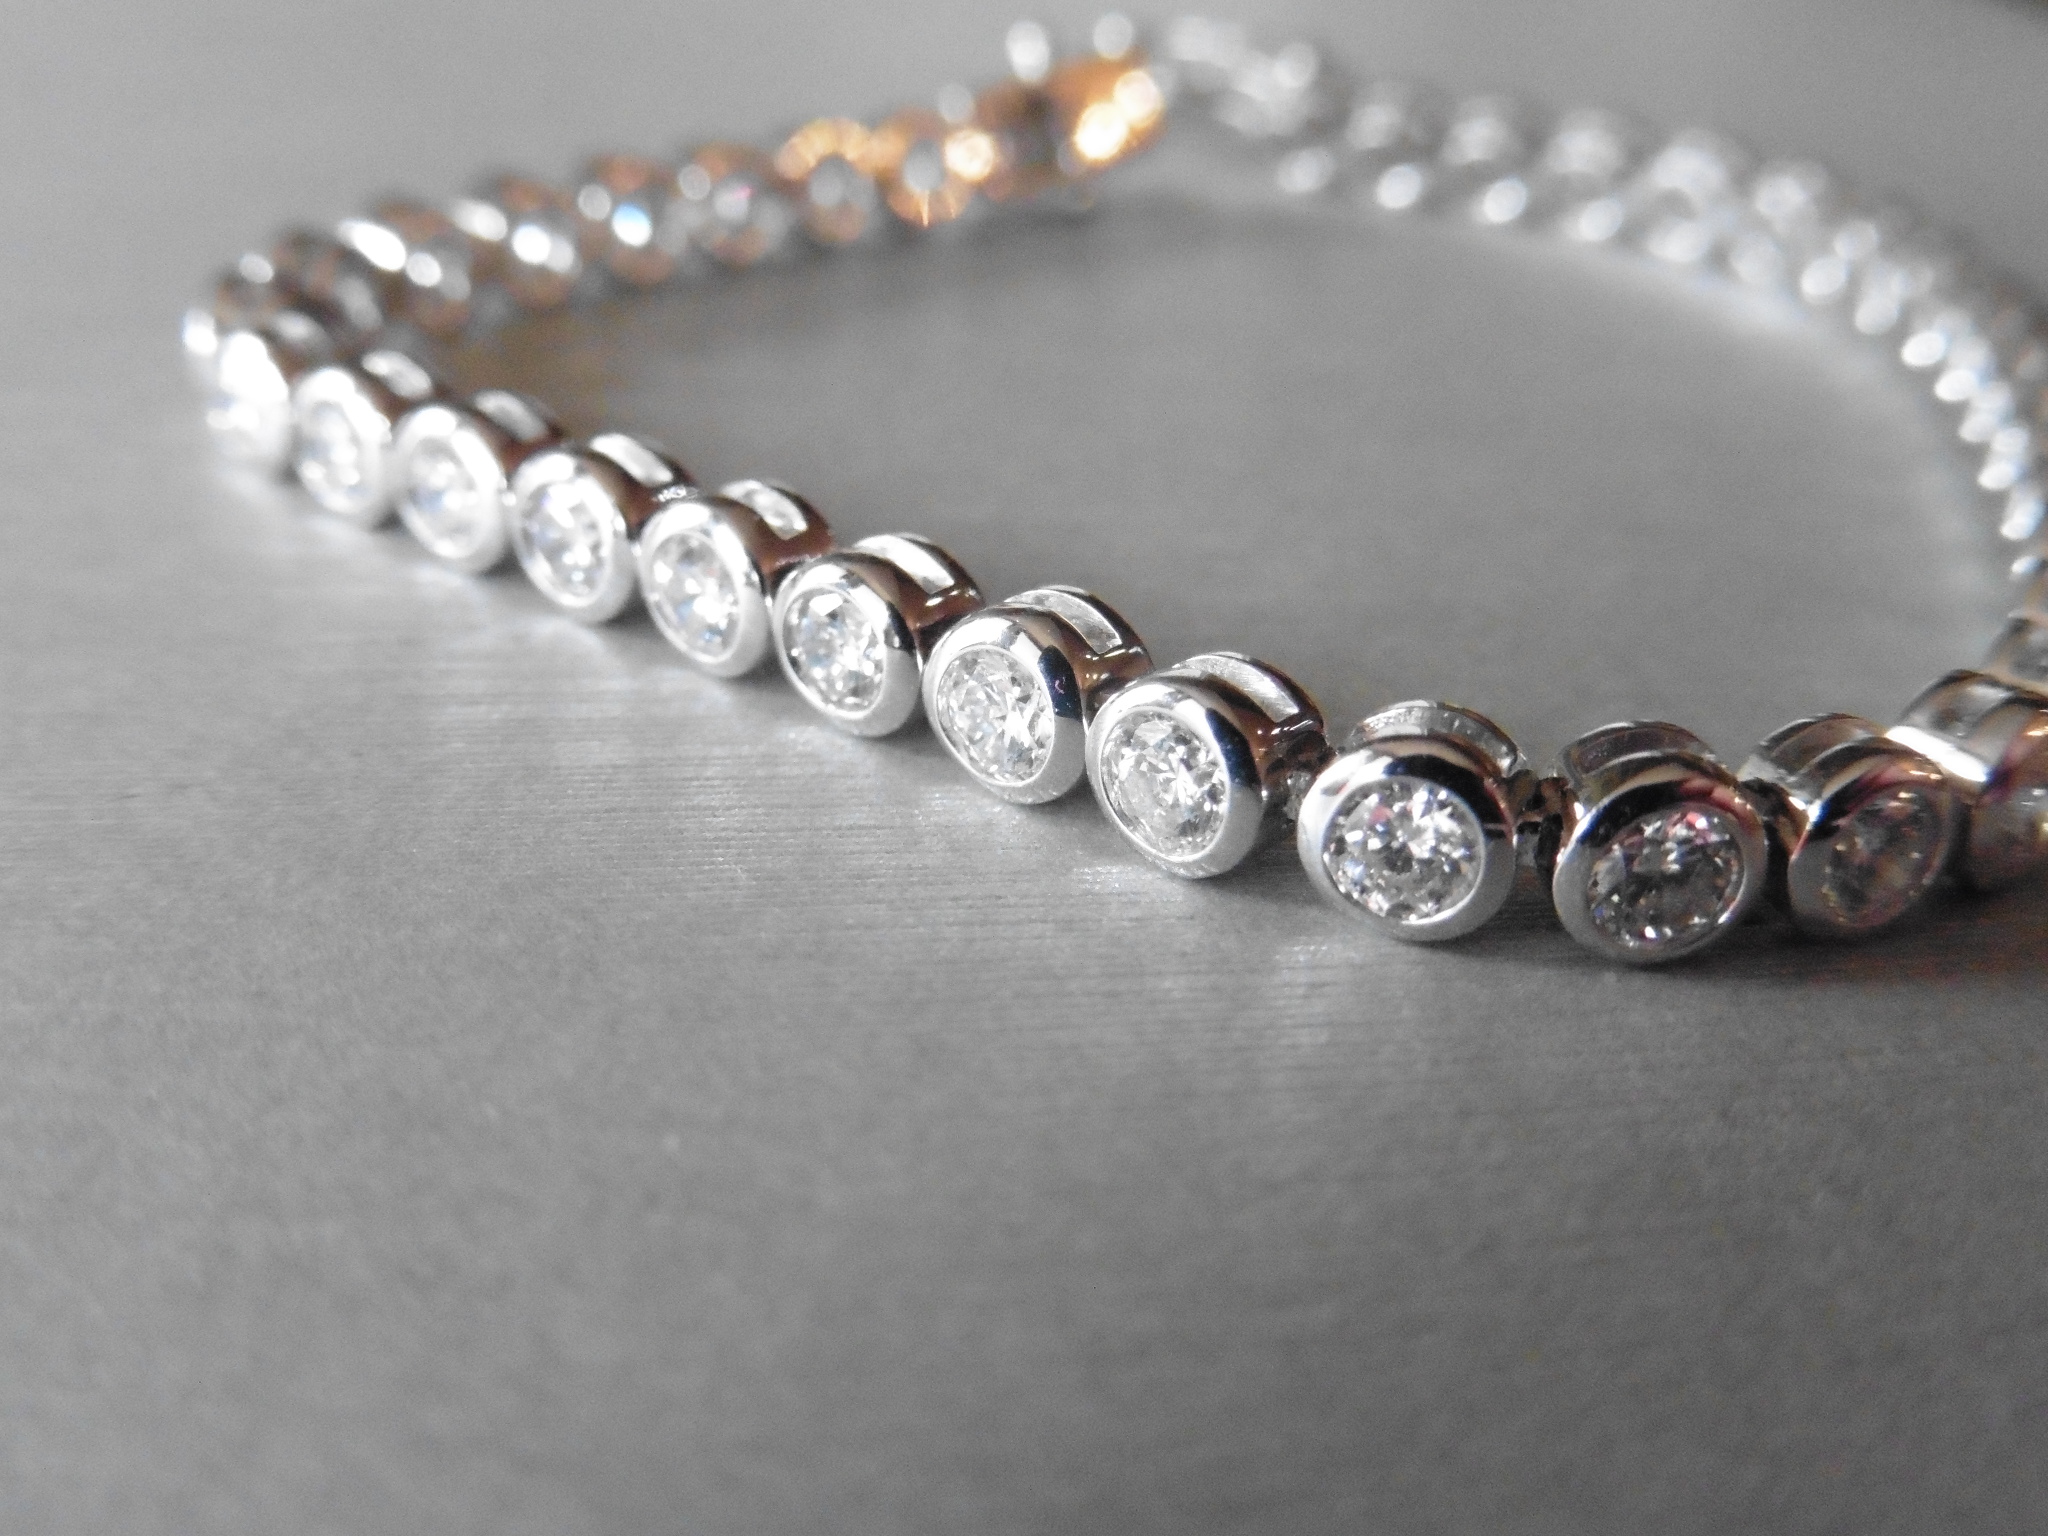 Brand new 18ct white gold diamond tennis style bracelet set with brilliant cut diamonds weighing 5ct